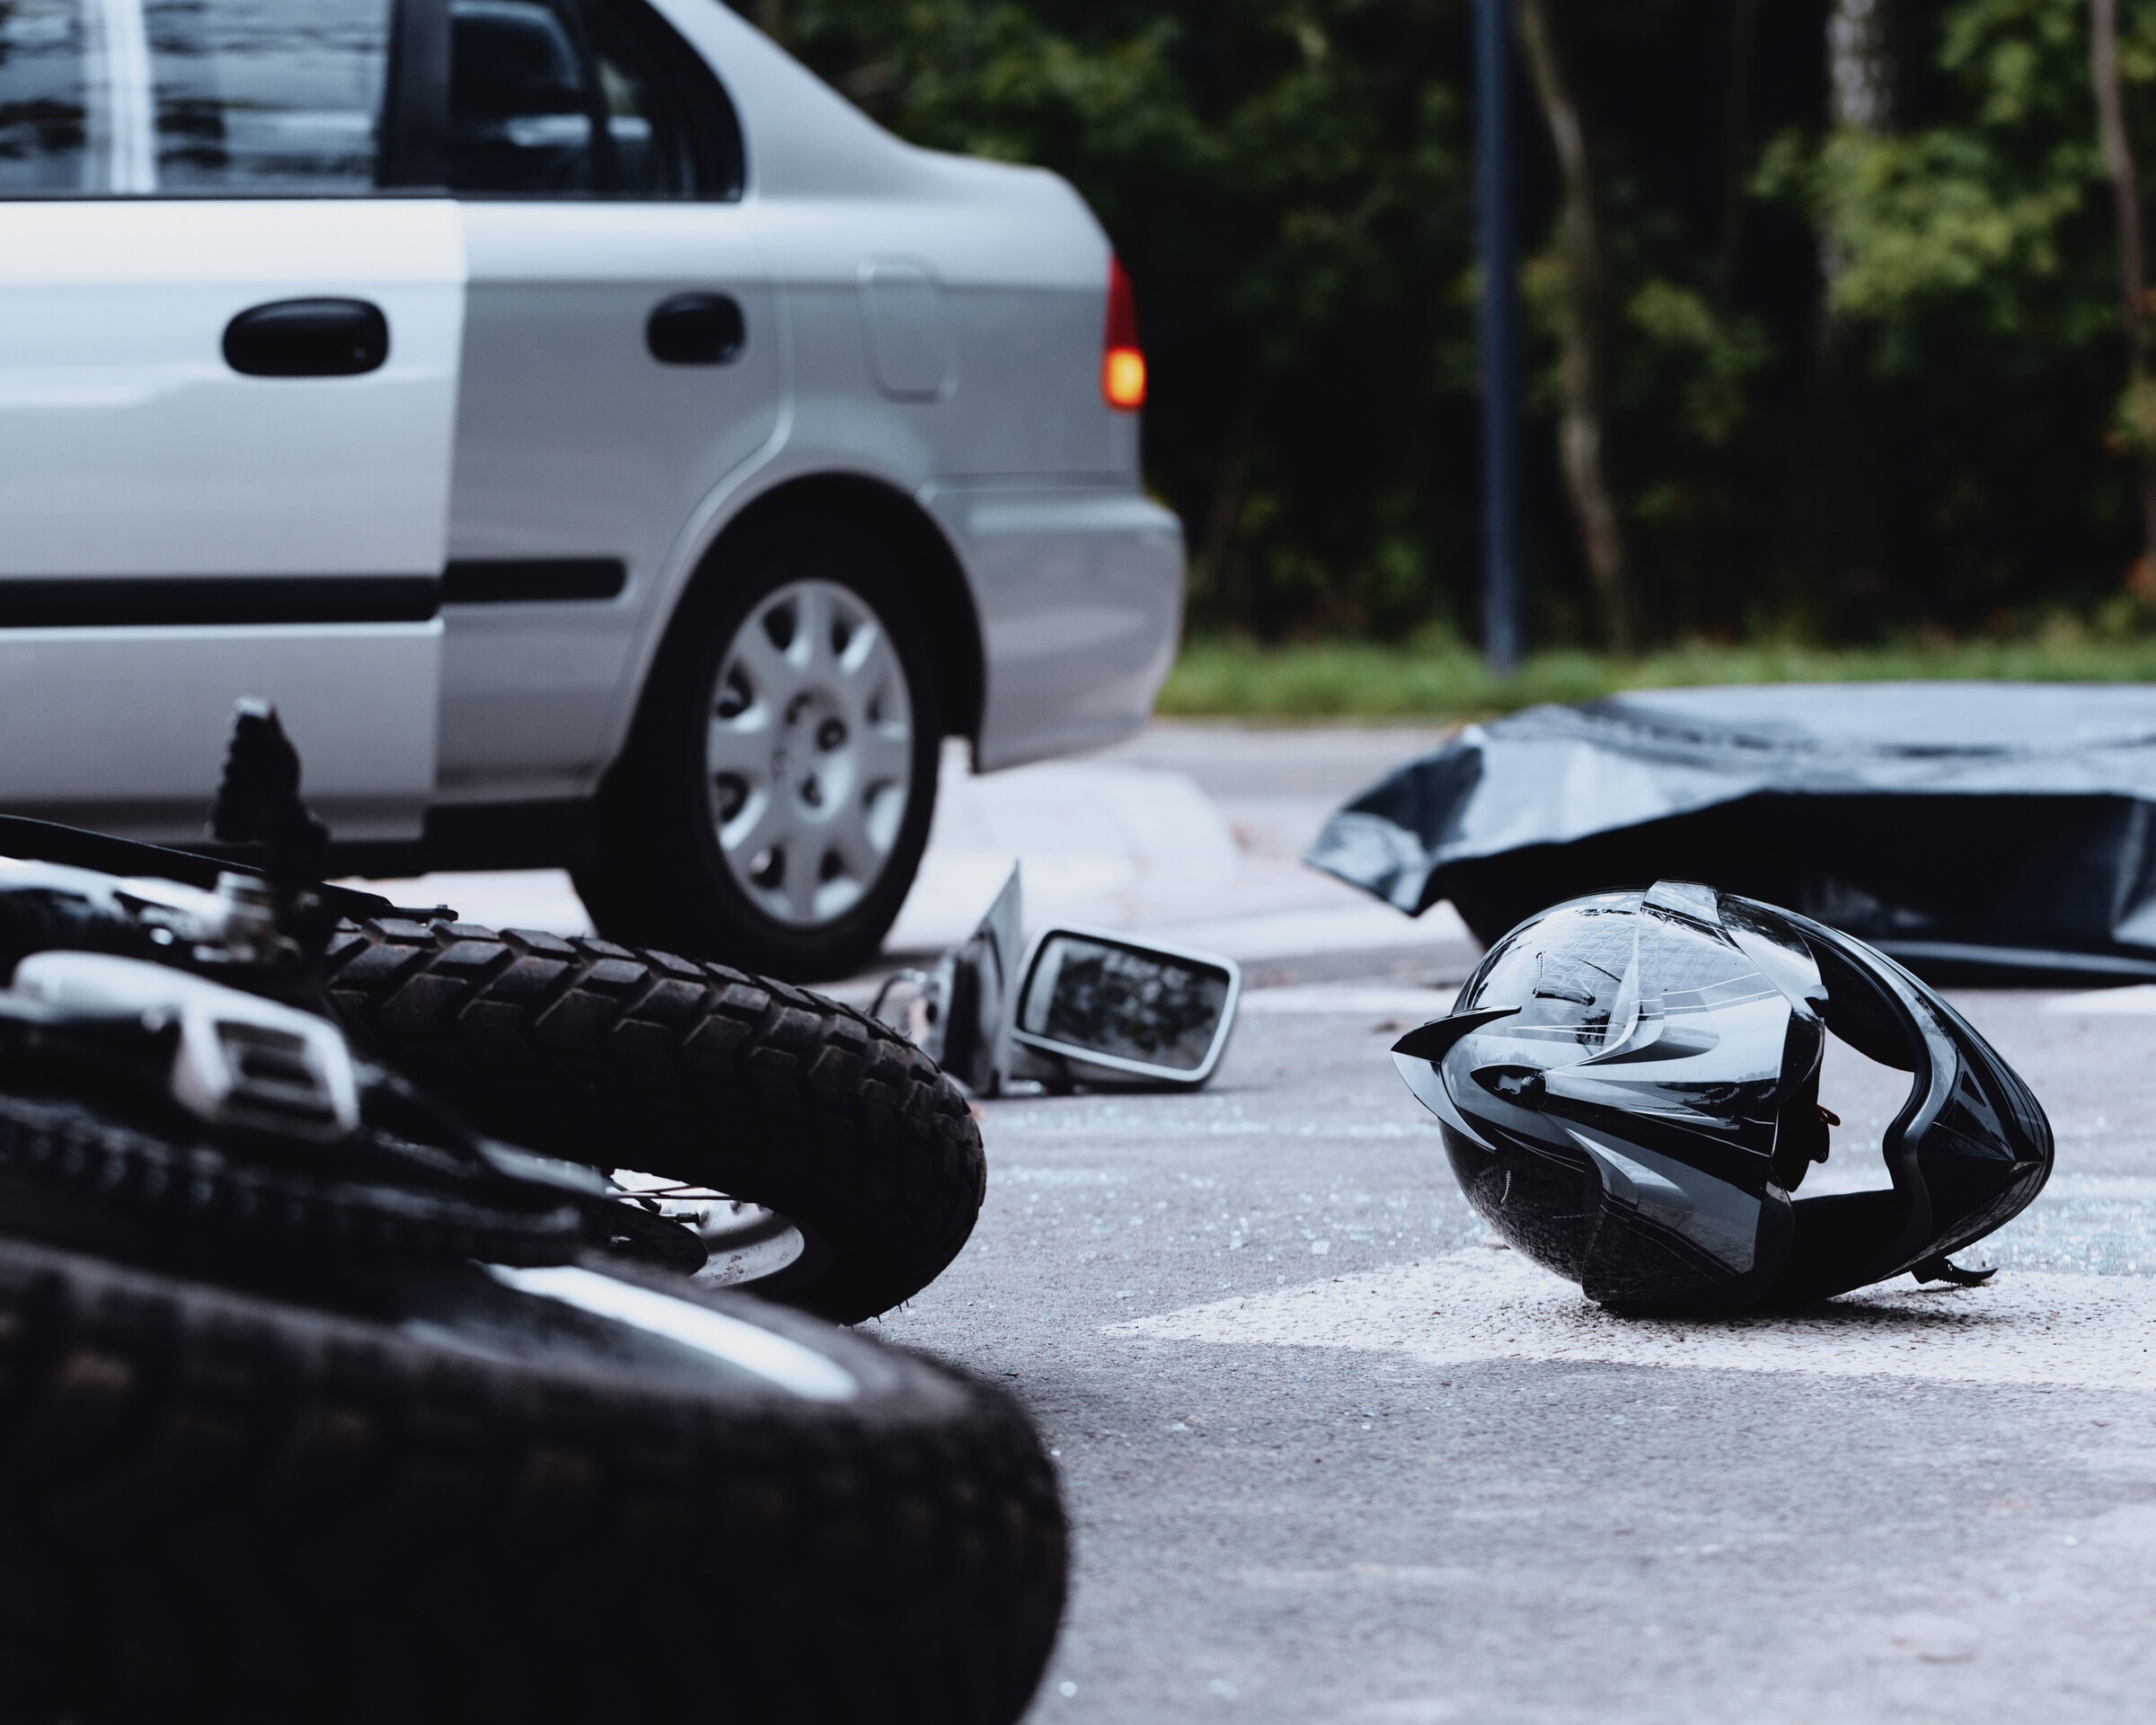 Reliable lawyers who are dedicated to providing support and guidance to those affected by car and motor vehicle accidents in Brownsville